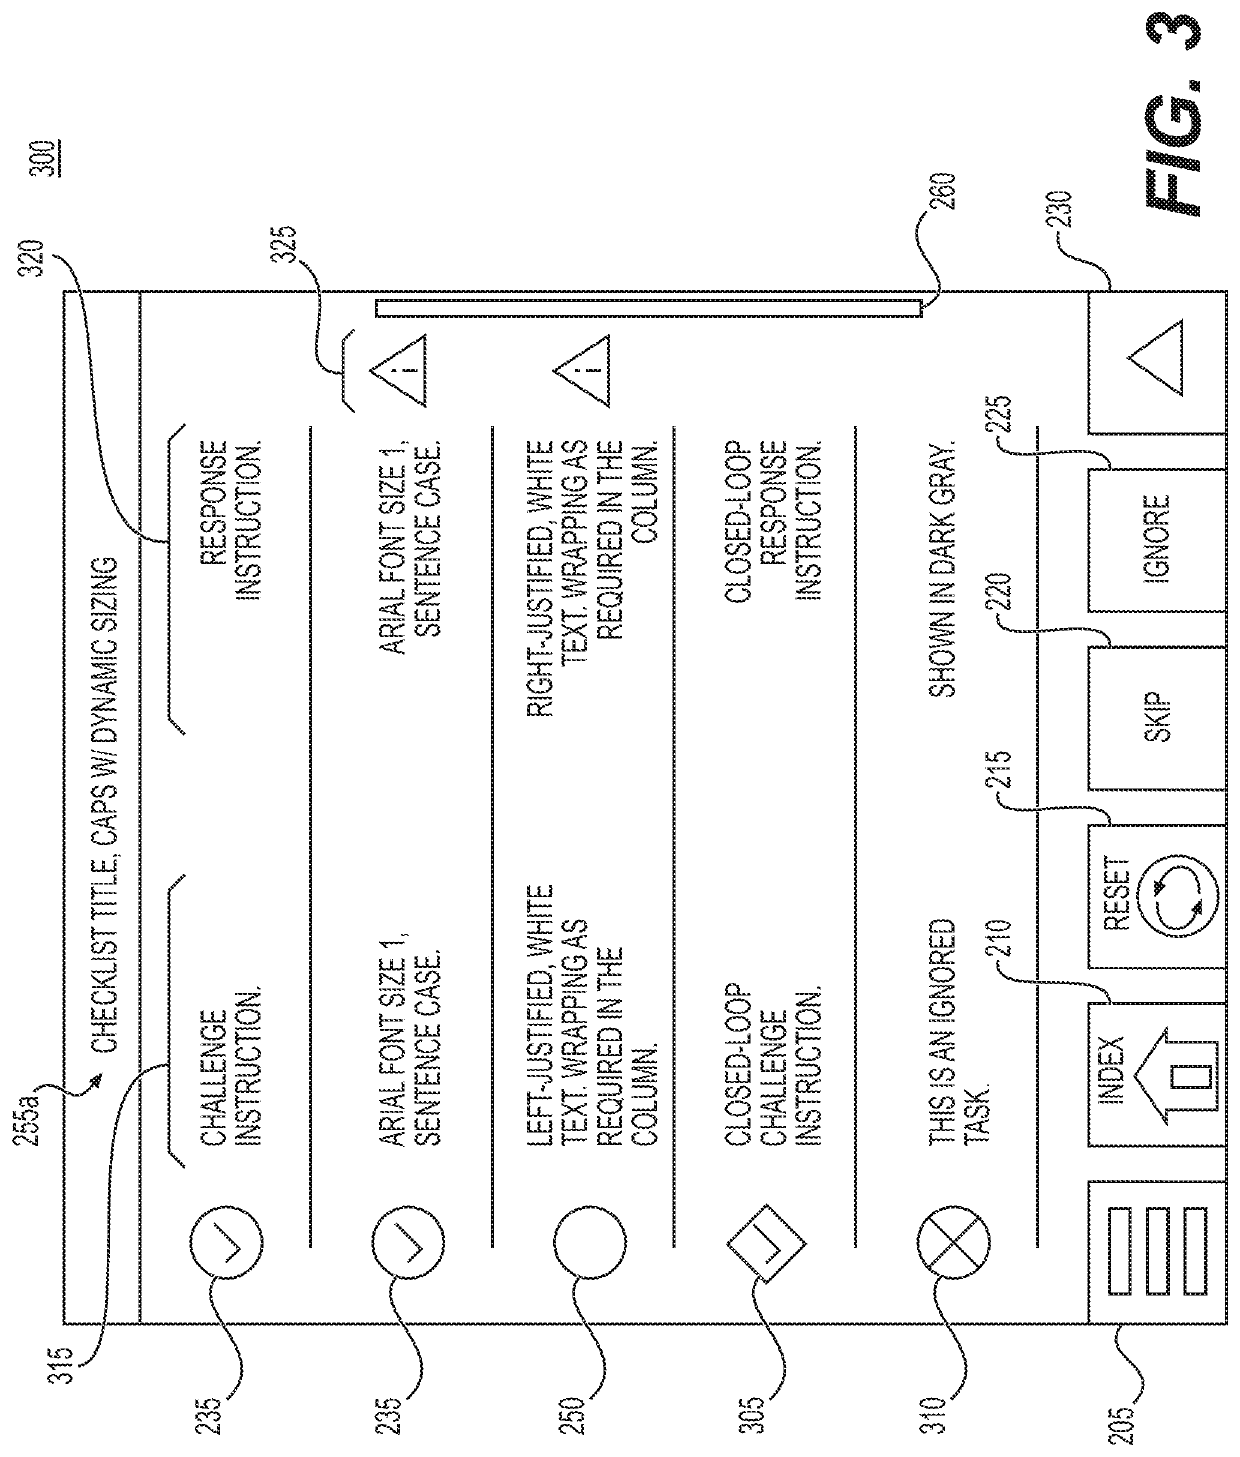 Methods and systems for electronic checklist data references